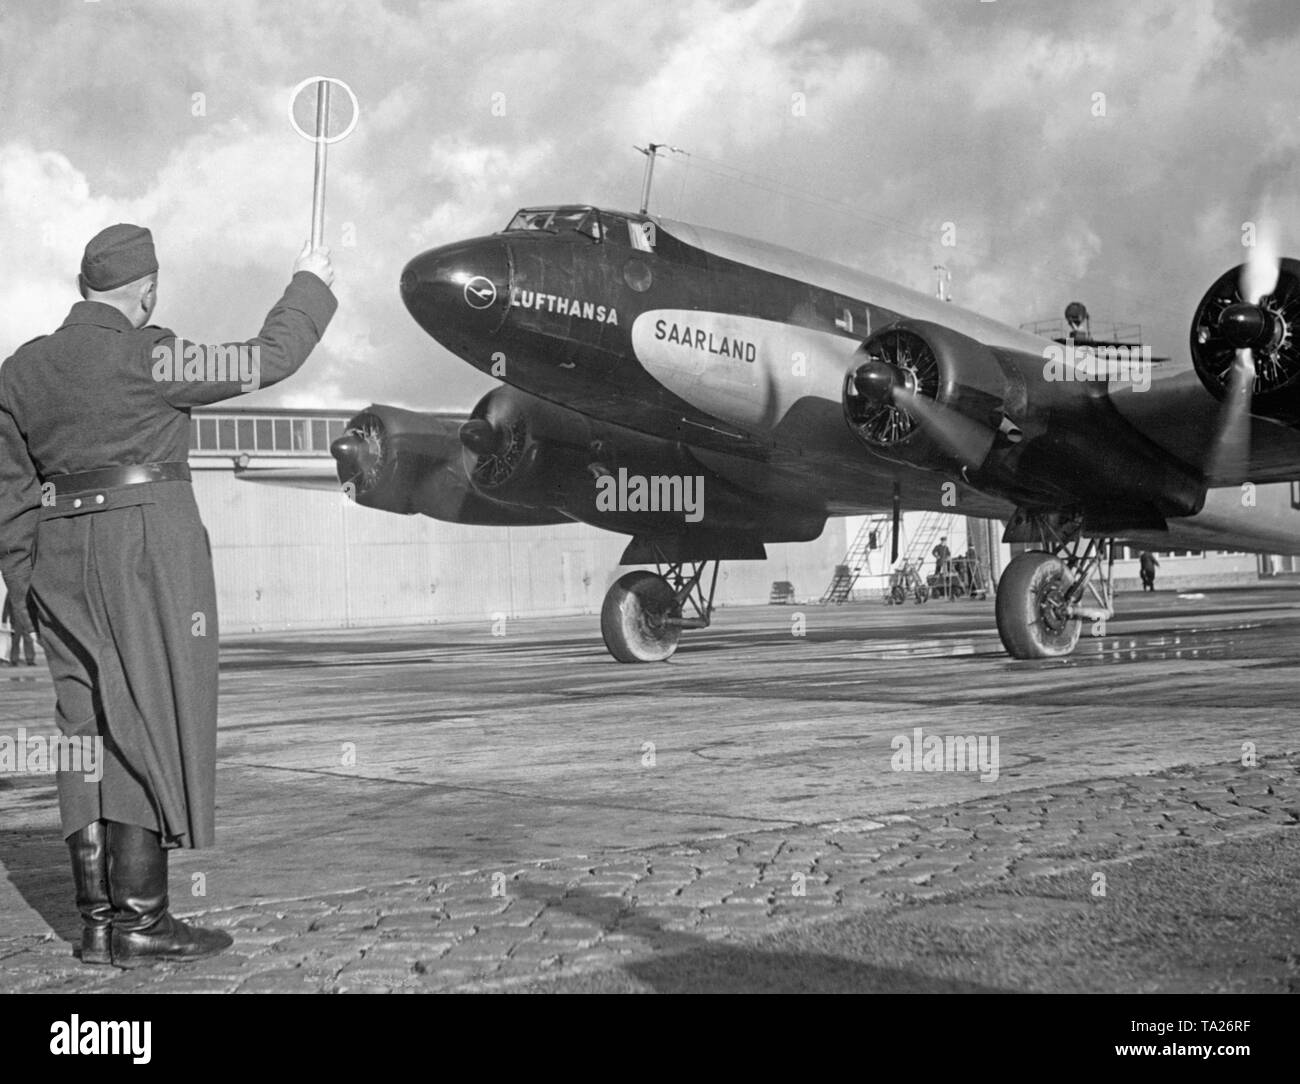 A Focke-Wulf Condor of Deutsche Lufthansa at the Berlin-Rangsdorf Airport. The 'Condor' with the baptismal name 'Saarland' bore the tail number D-ADHR. Stock Photo